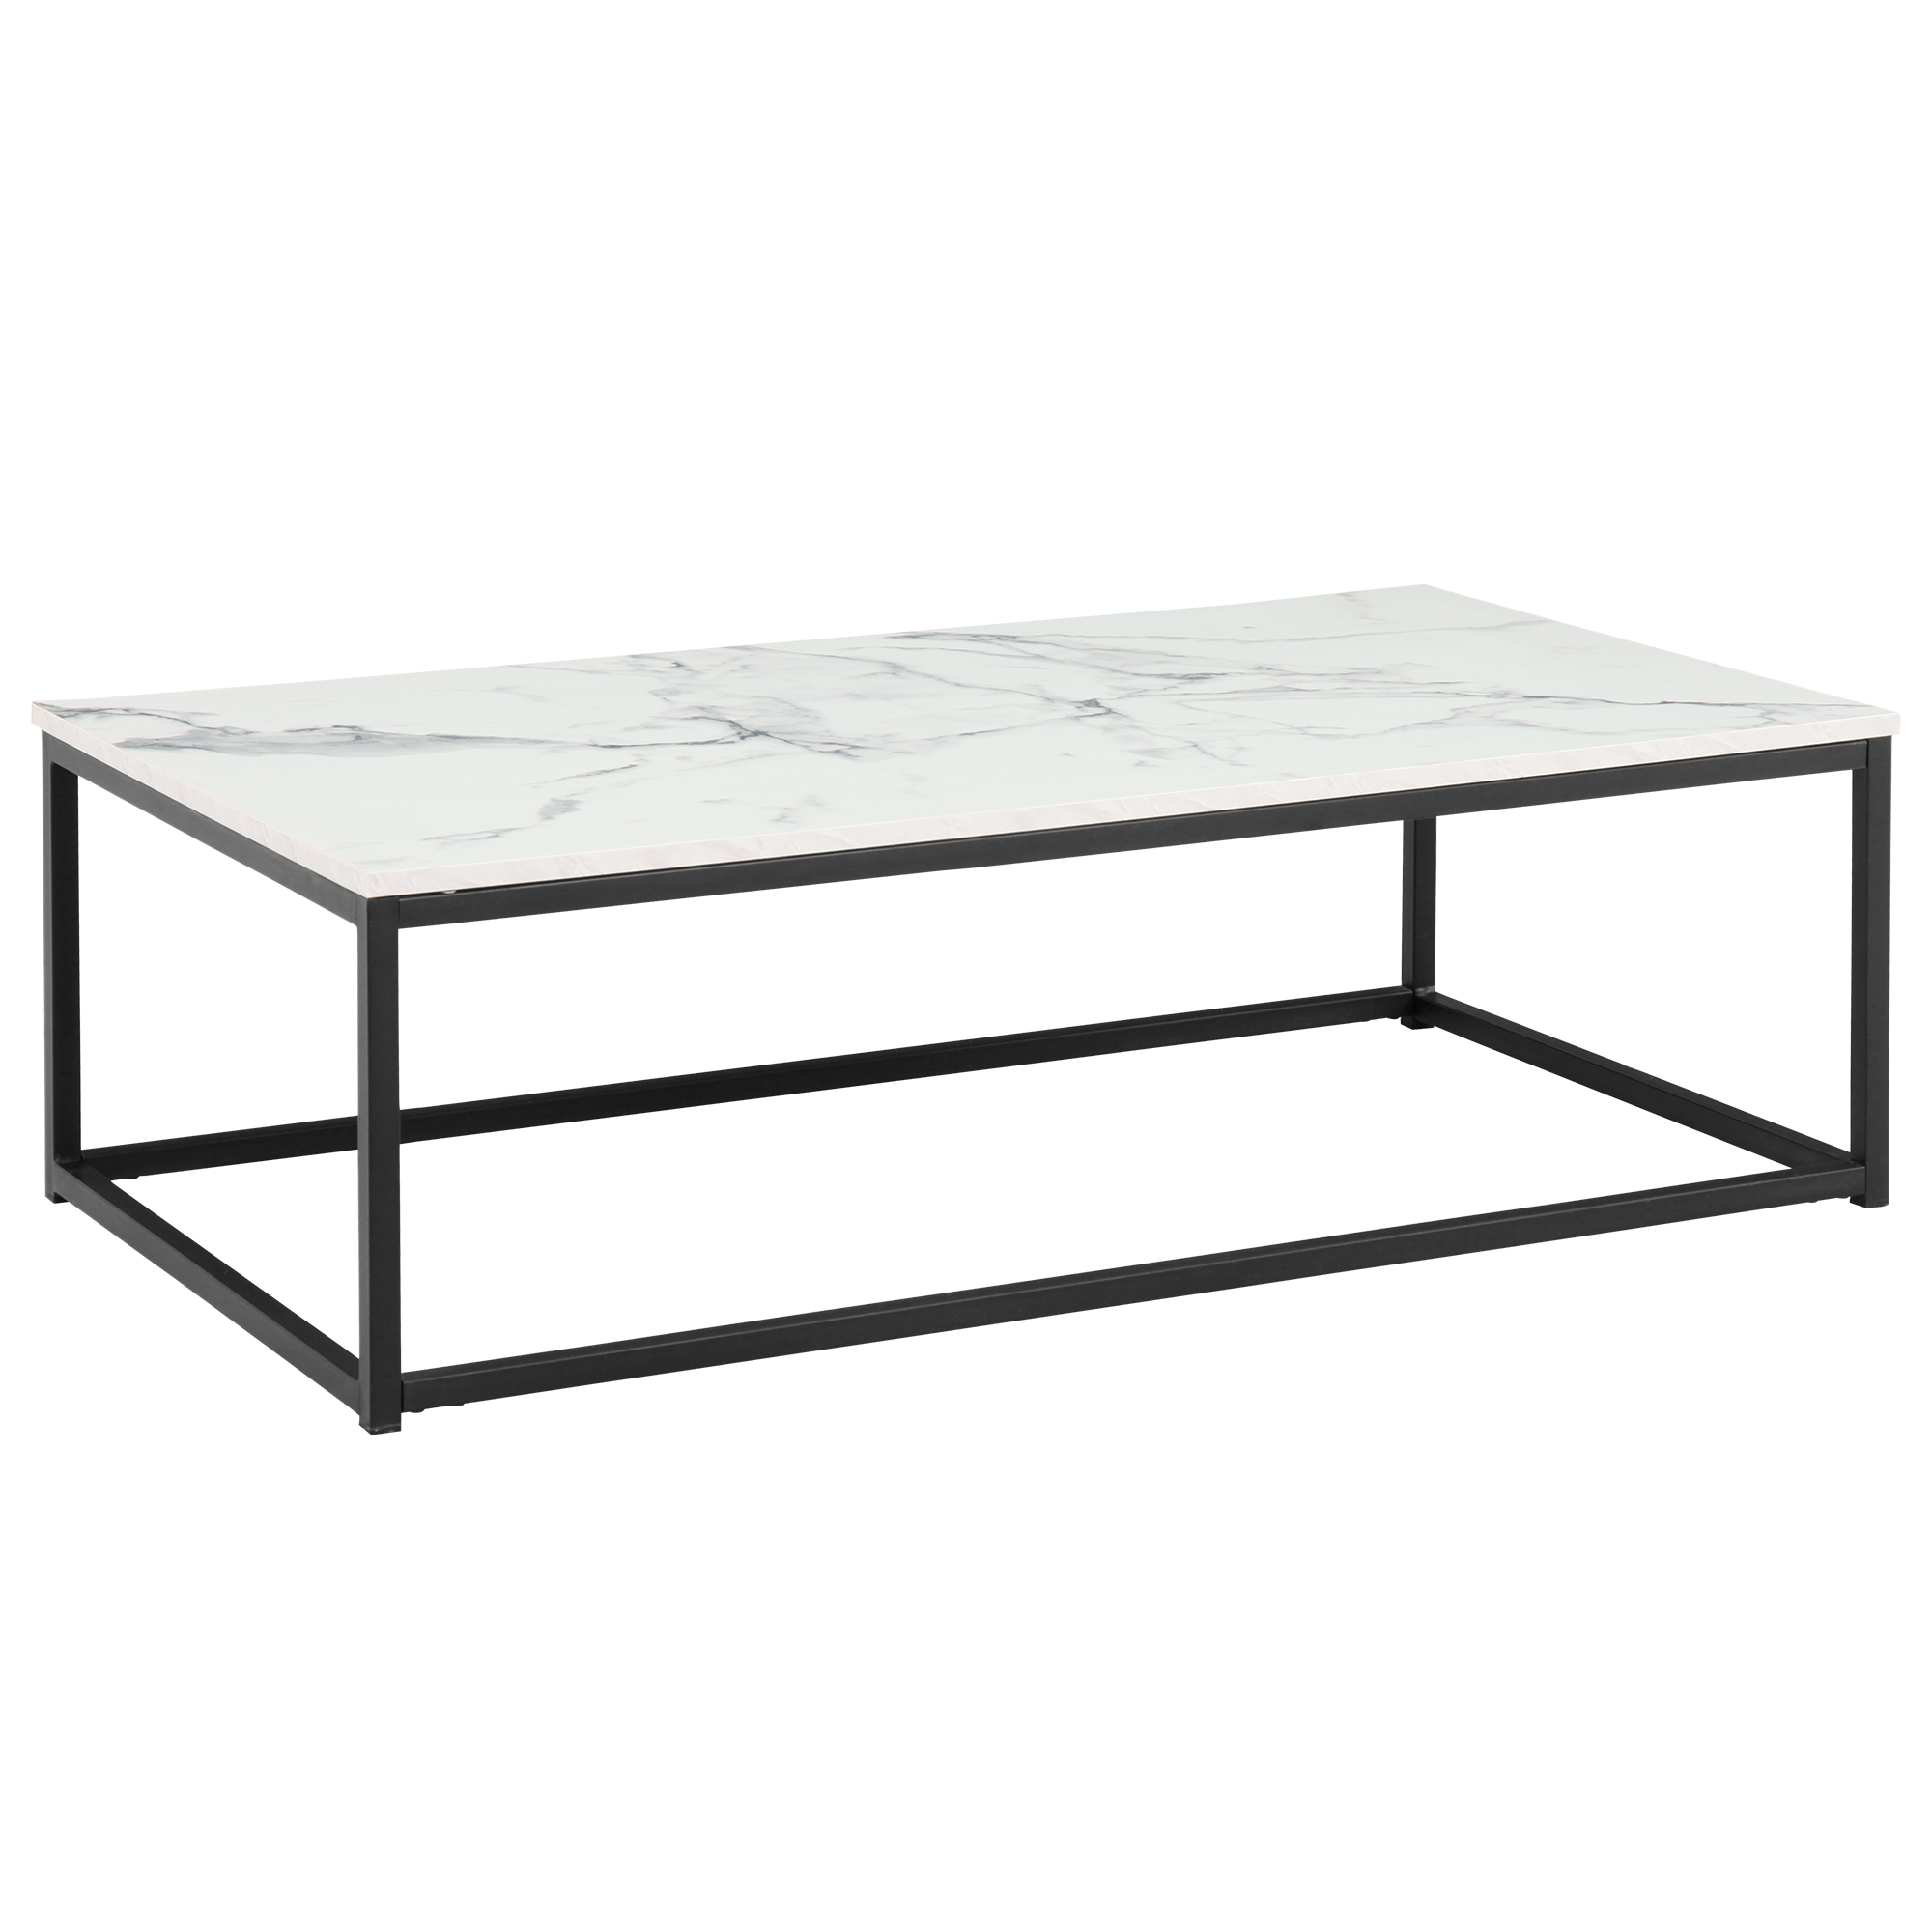 COFFEE TABLE(WHITE)（rectangular） +for kitchen, restaurant, bedroom, living room and many other occasions-Boyel Living